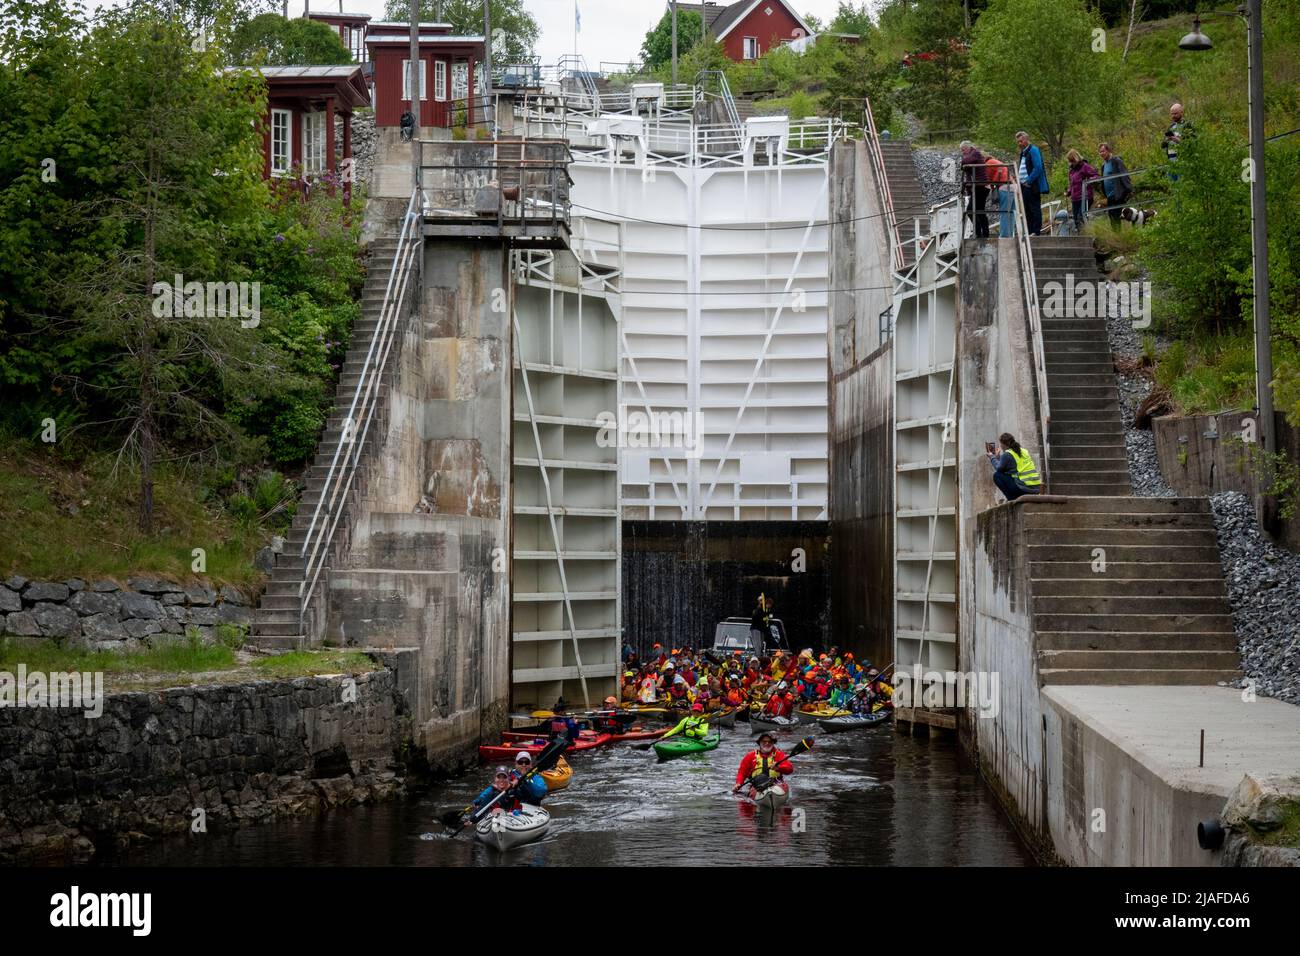 Brekke 20220529.60 colorful kayaks paddling through the locks of the Halden Canal on Sunday. With its 26.6 m total lifting height in four chambers, Brekke locks are Northern Europe's highest continuous lock staircase. After a two-year pandemic break, there is a record-breaking participation in the annual 57 km long paddle trip from Oerje to Halden. Photo: Heiko Junge / NTB Stock Photo